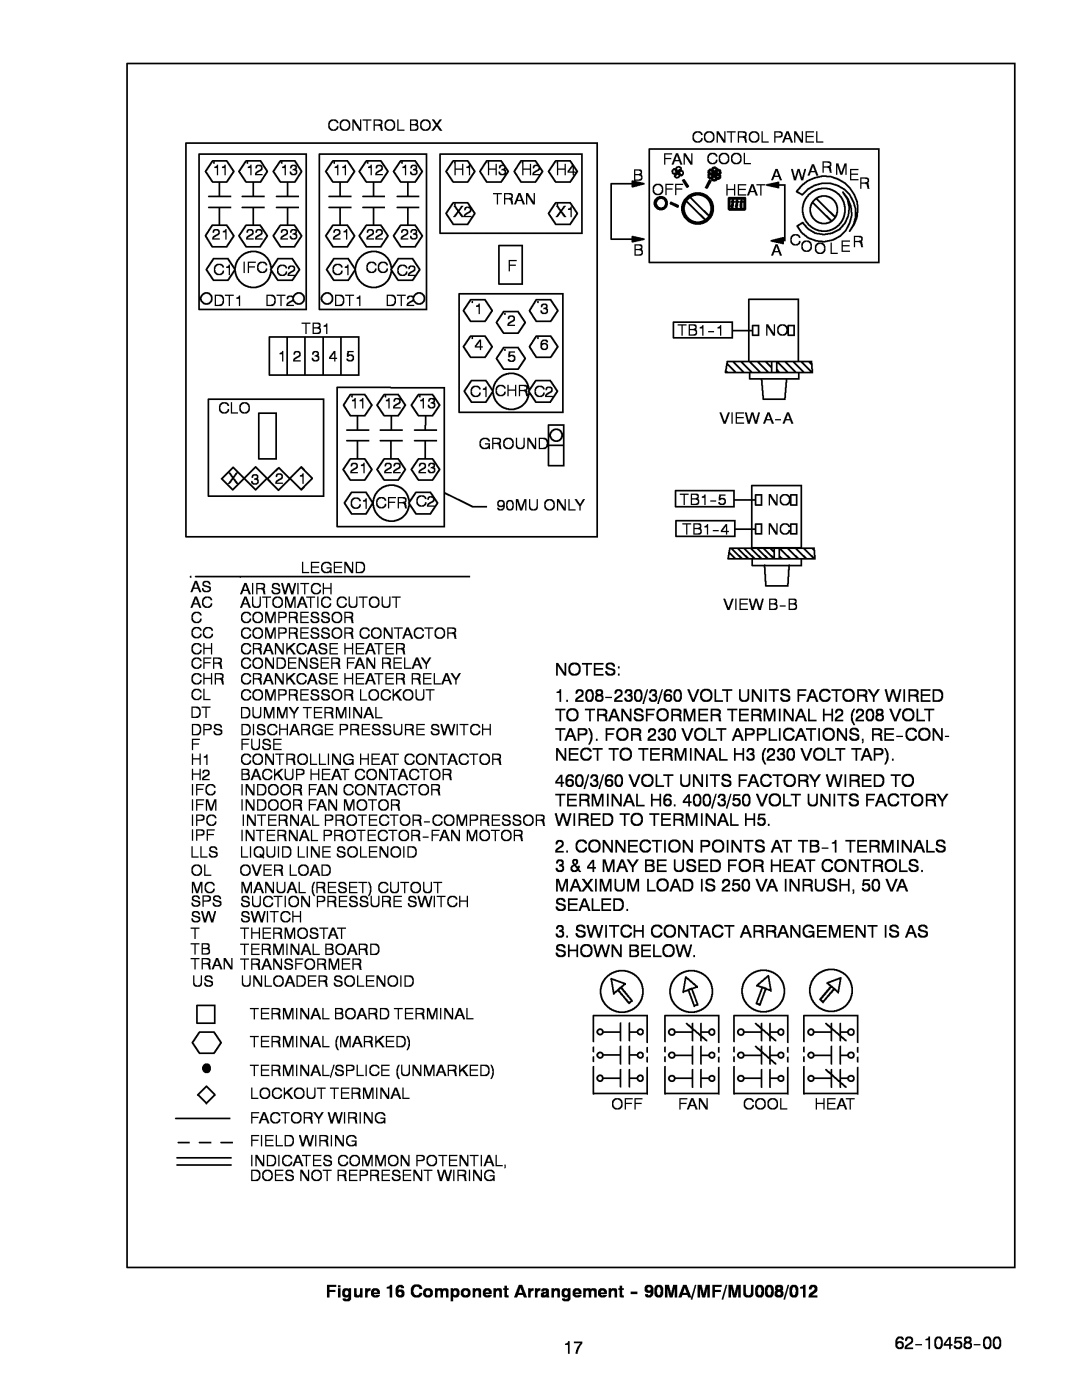 Carrier 90MA/MF/MU manual CONNECTION POINTS AT TB--1TERMINALS, Switch Contact Arrangement Is As Shown Below, 62--10458--00 